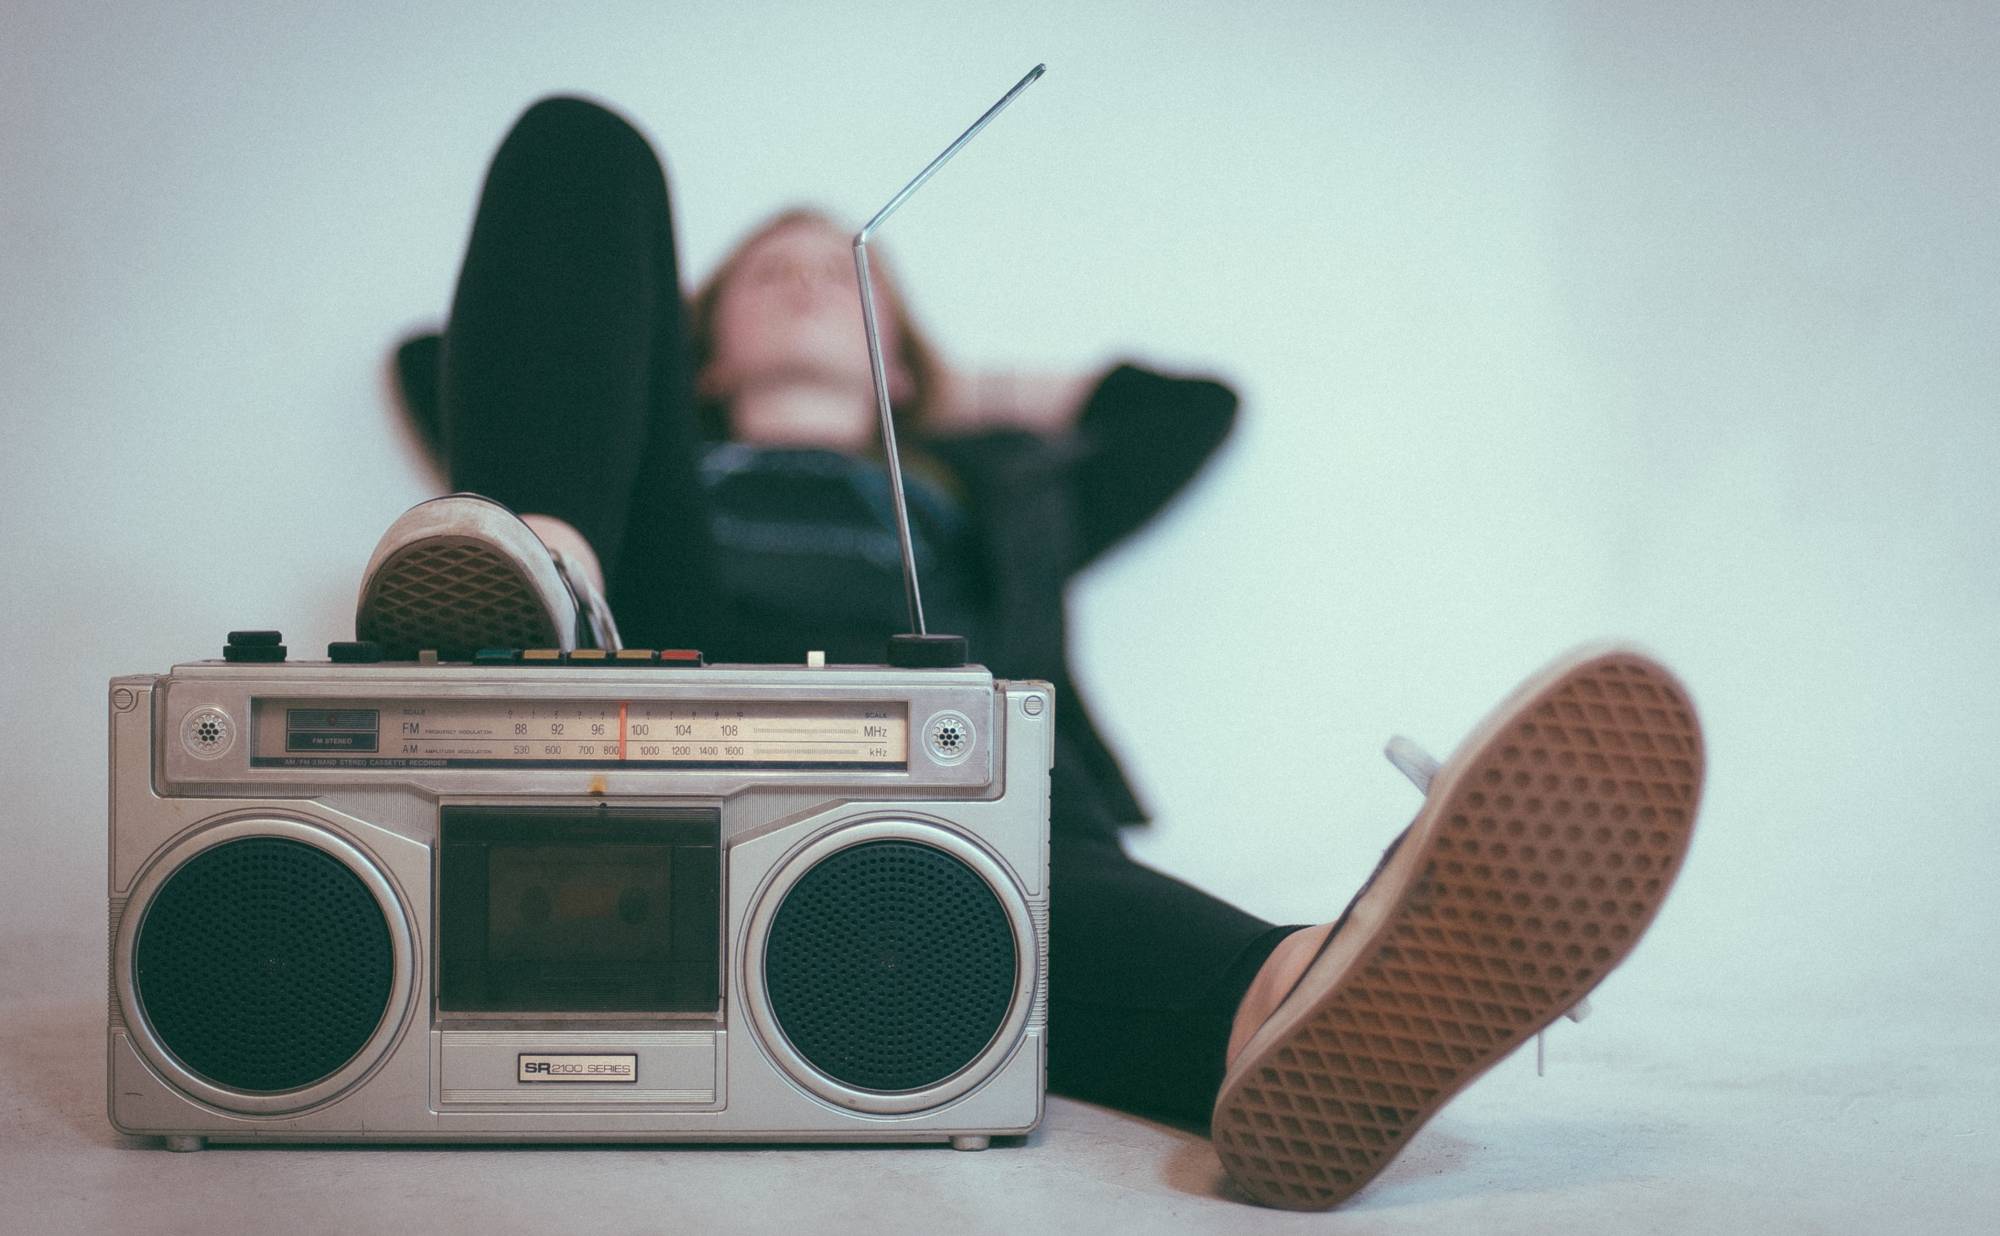 Person reclining against a wall with their foot on a boombox